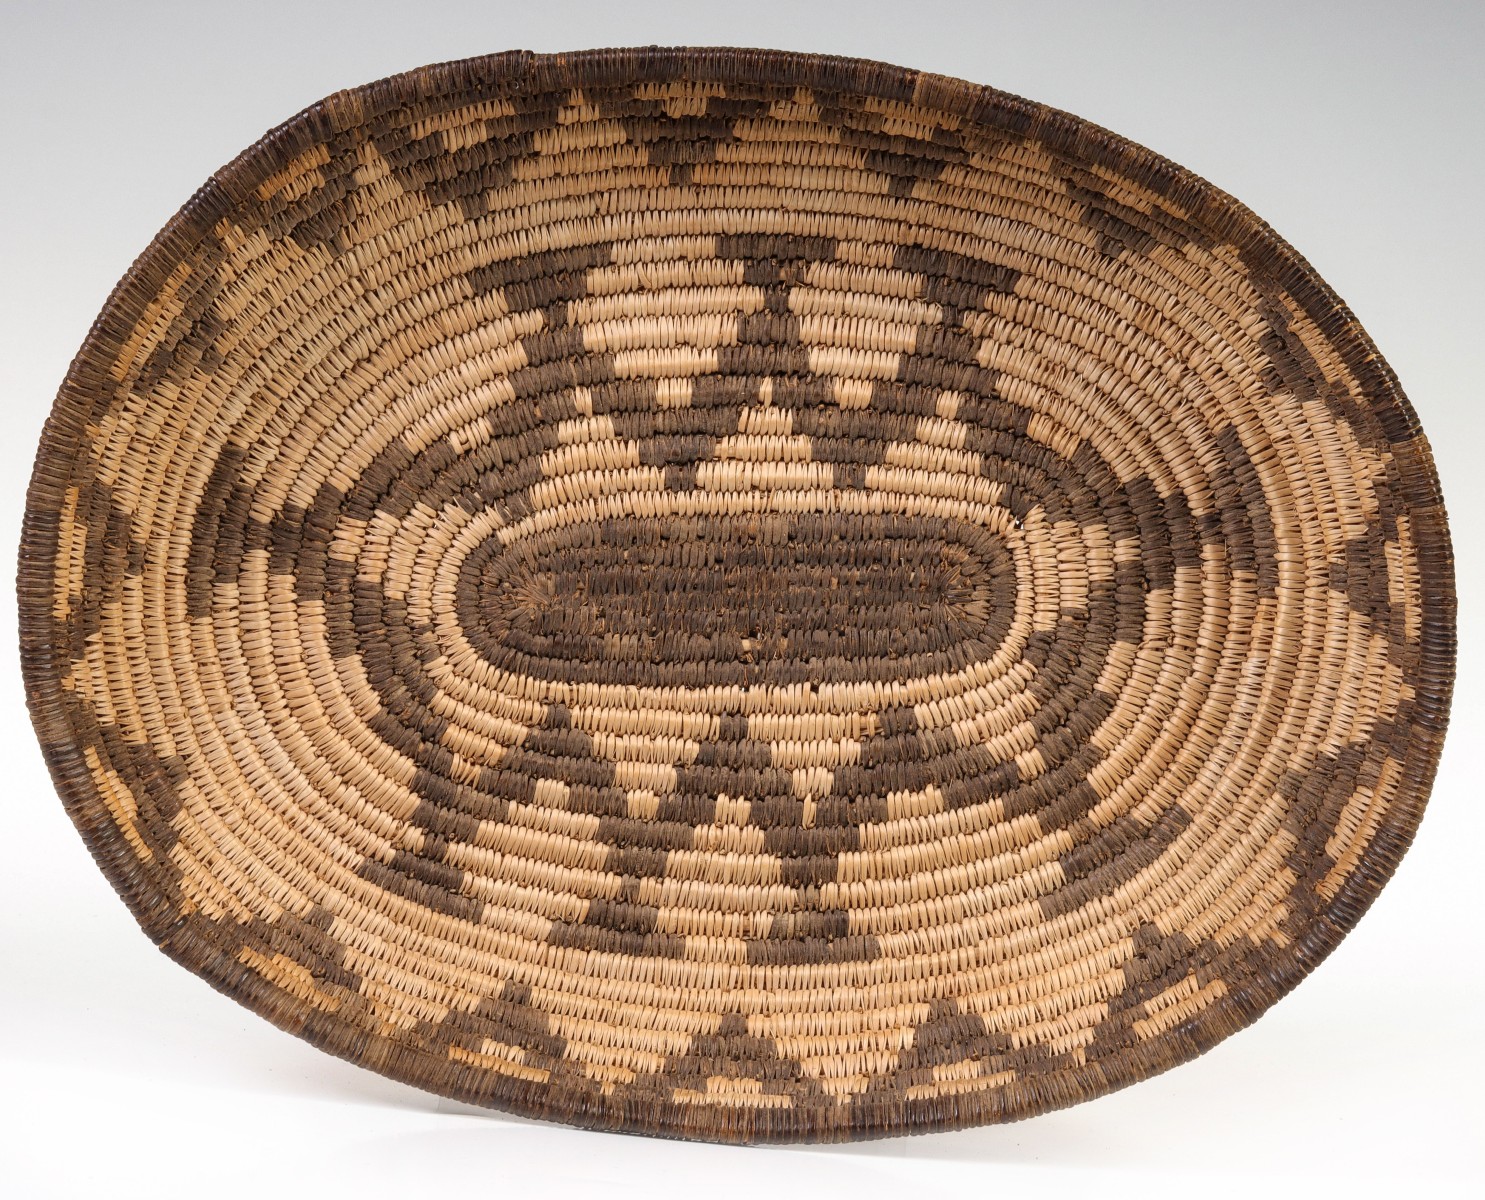 AN EARLY 20TH CENTURY APACHE SHALLOW OVAL BOWL